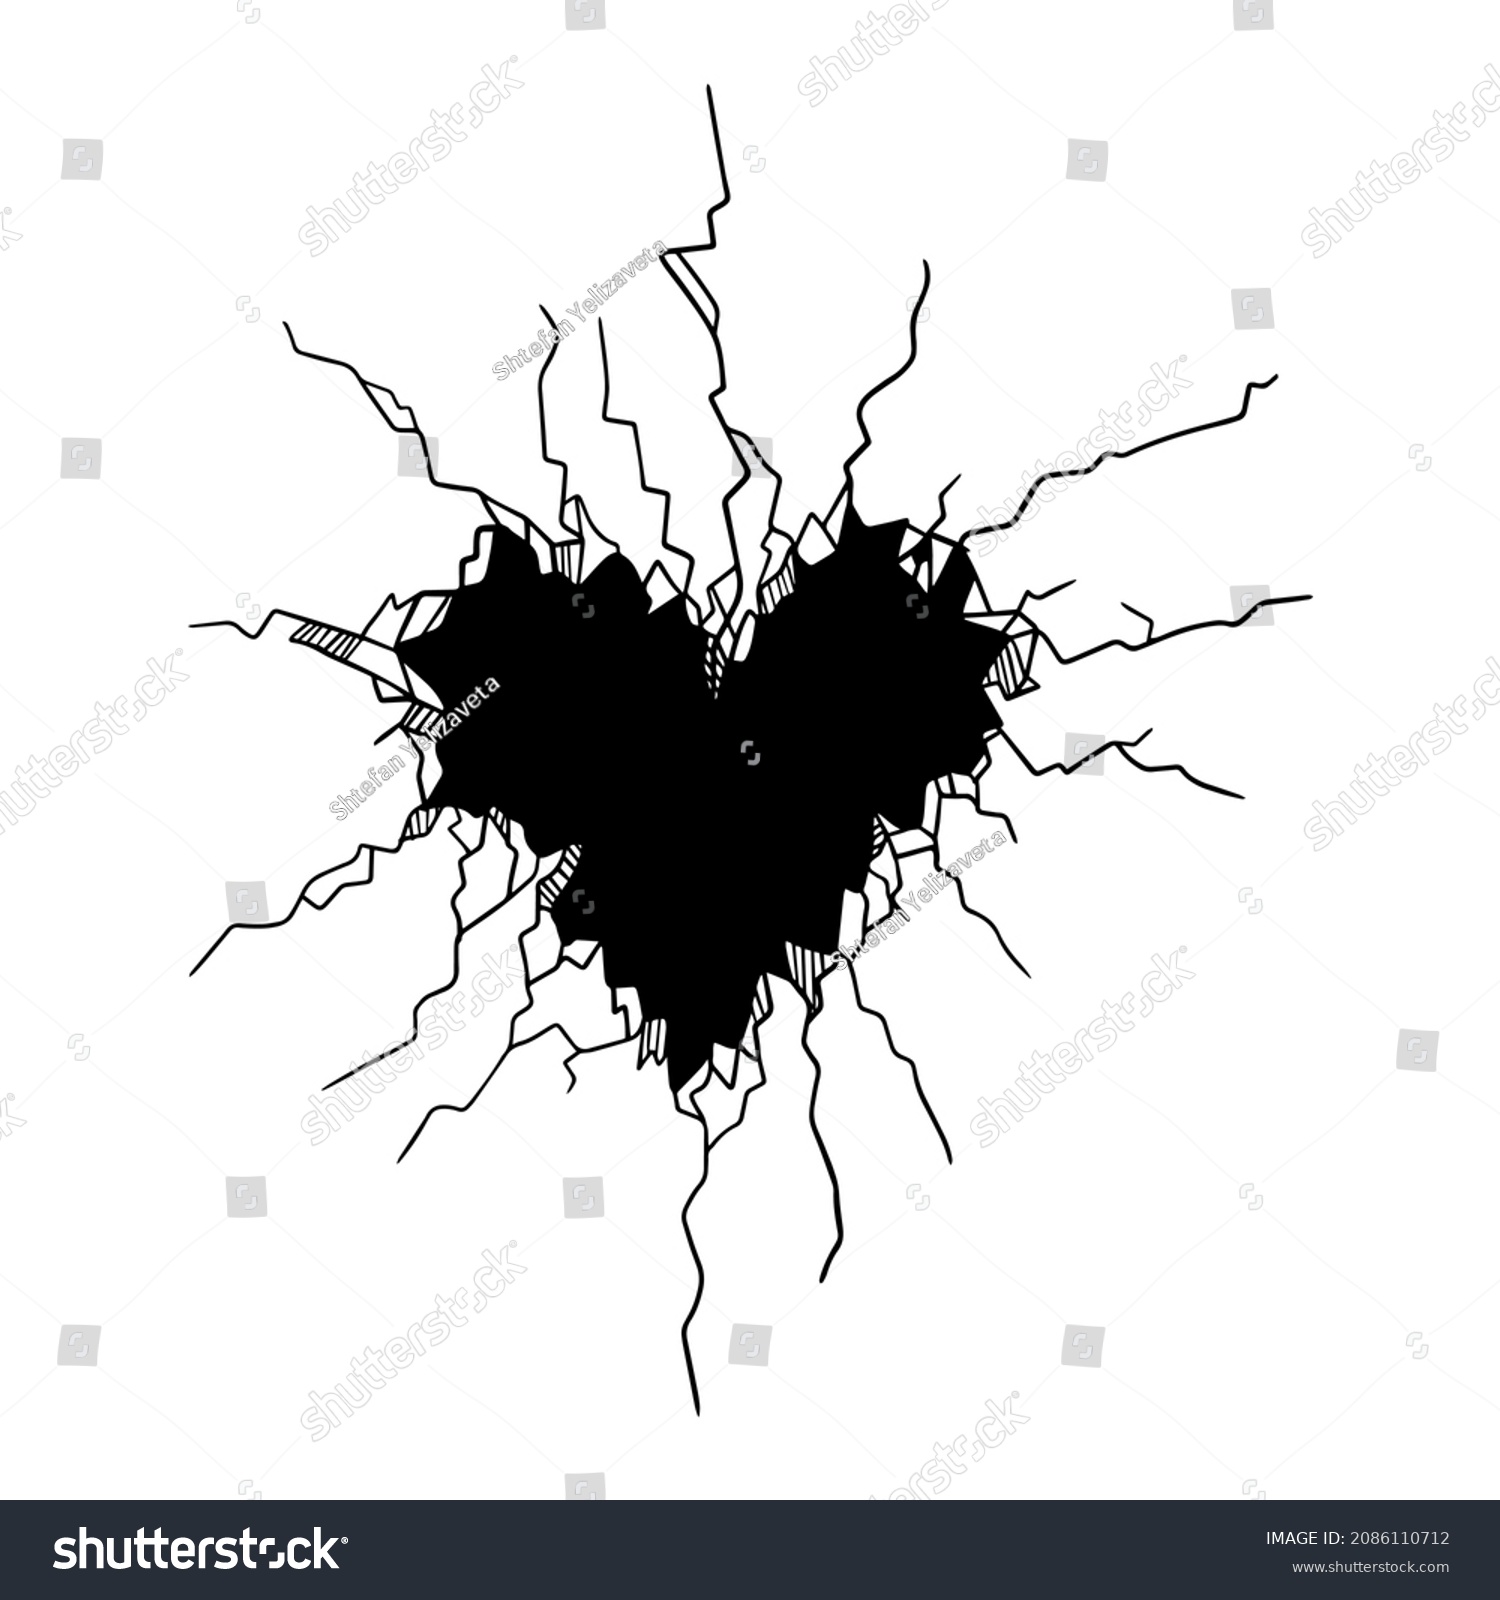 SVG of 
wall crack image, cracked ground form of a heart,illustration bw,broken, love is cracked, vector clipart svg